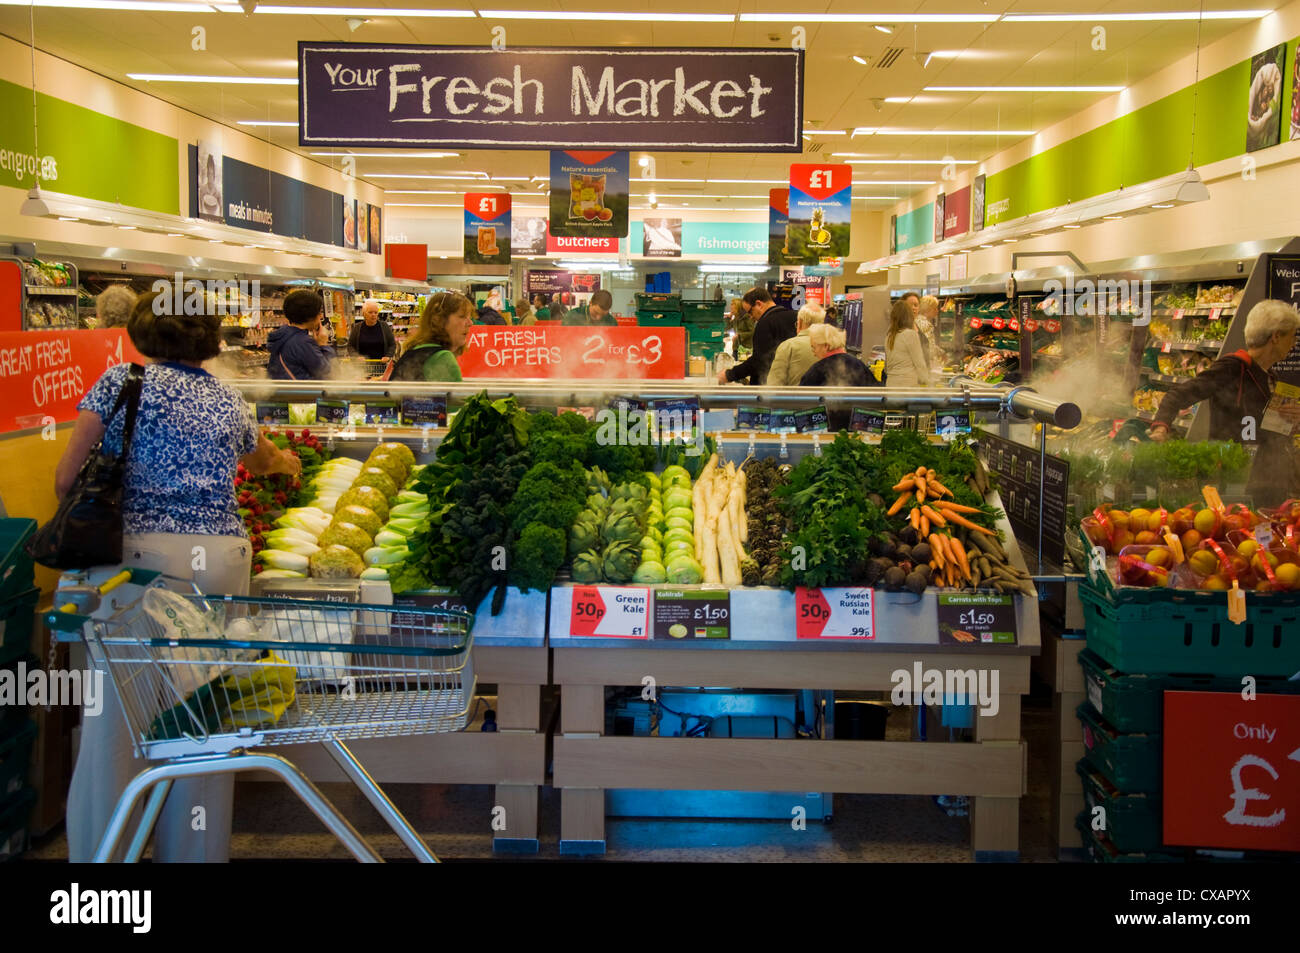 Morrisons Store of the Future concept showing misting technology to keep fruit and vegetables fresh looking Stock Photo